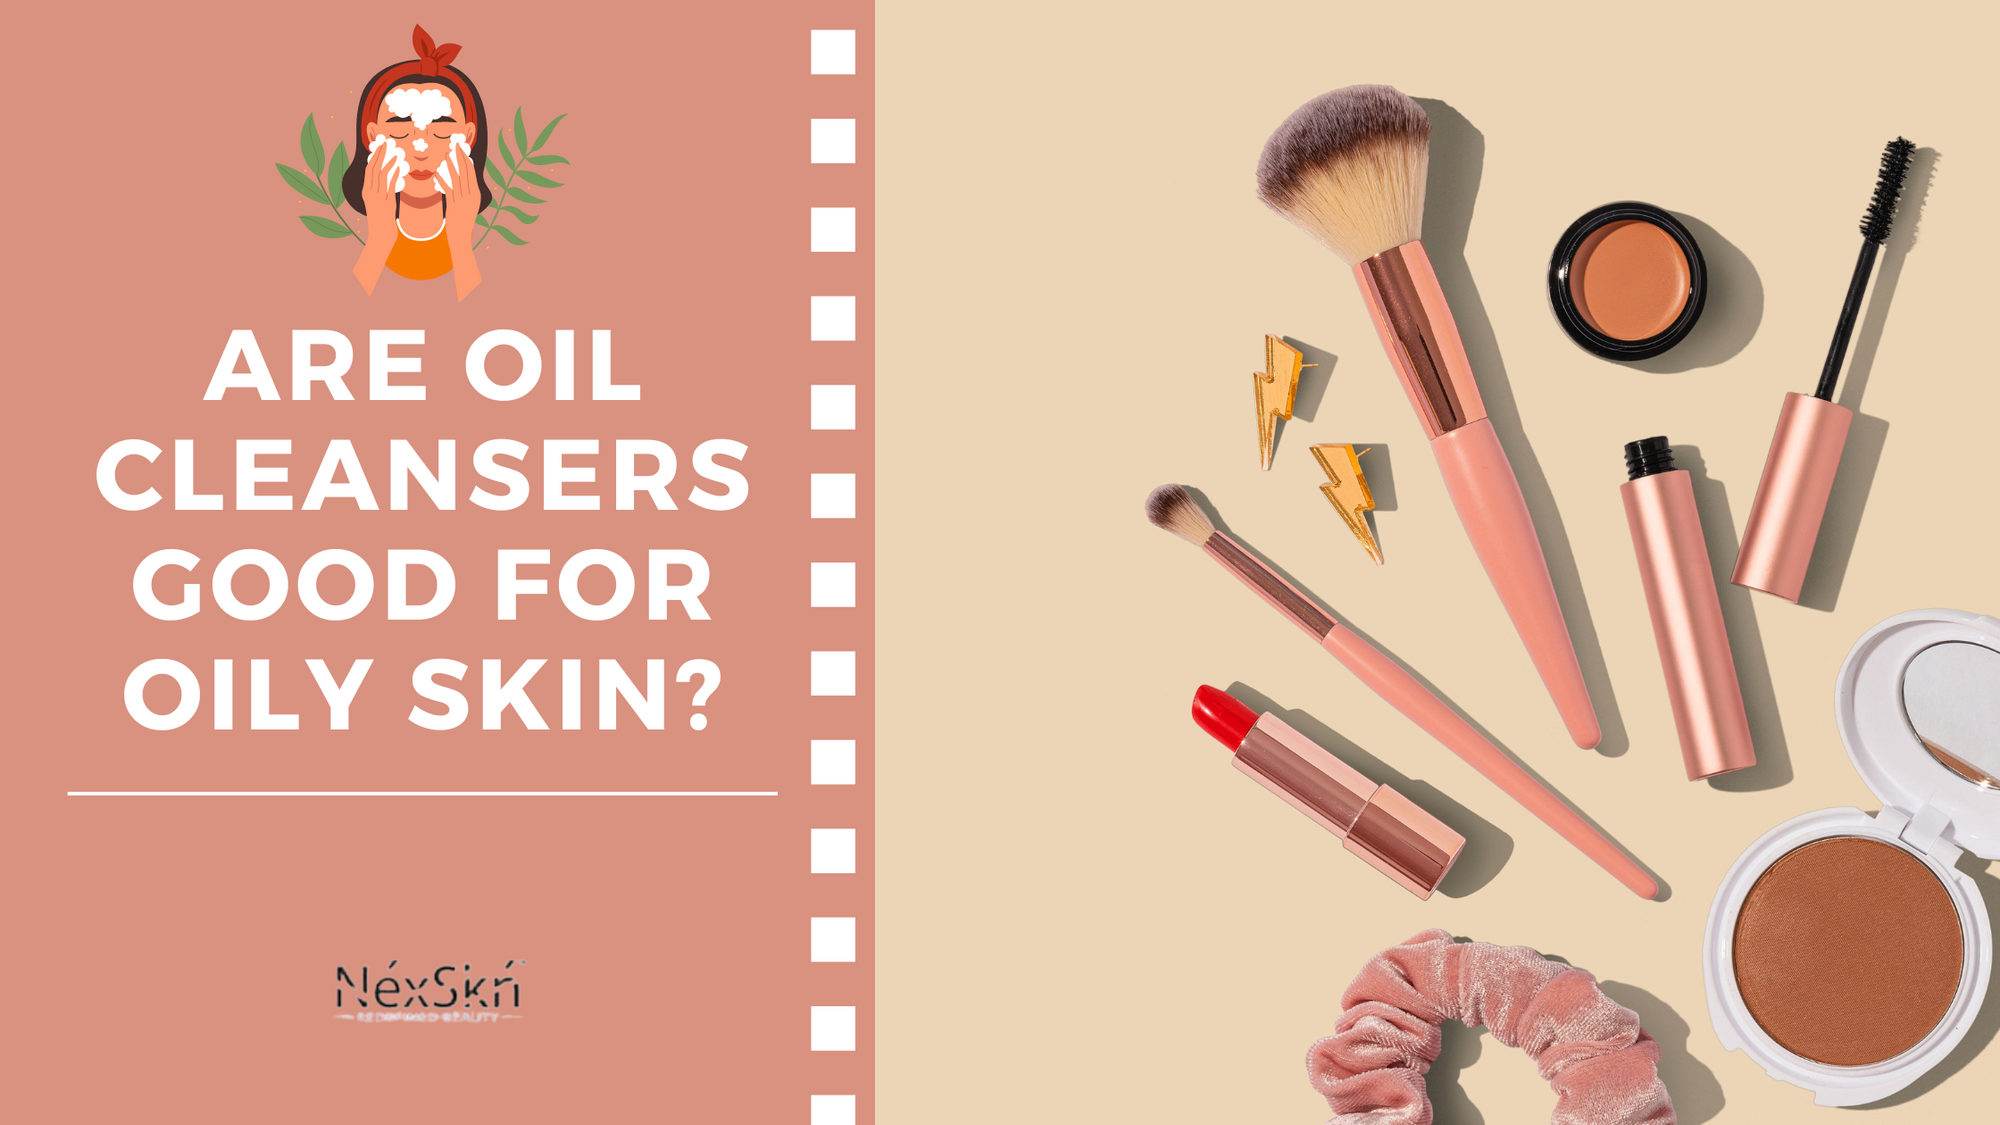 Are Oil Cleansers Good for Oily Skin?